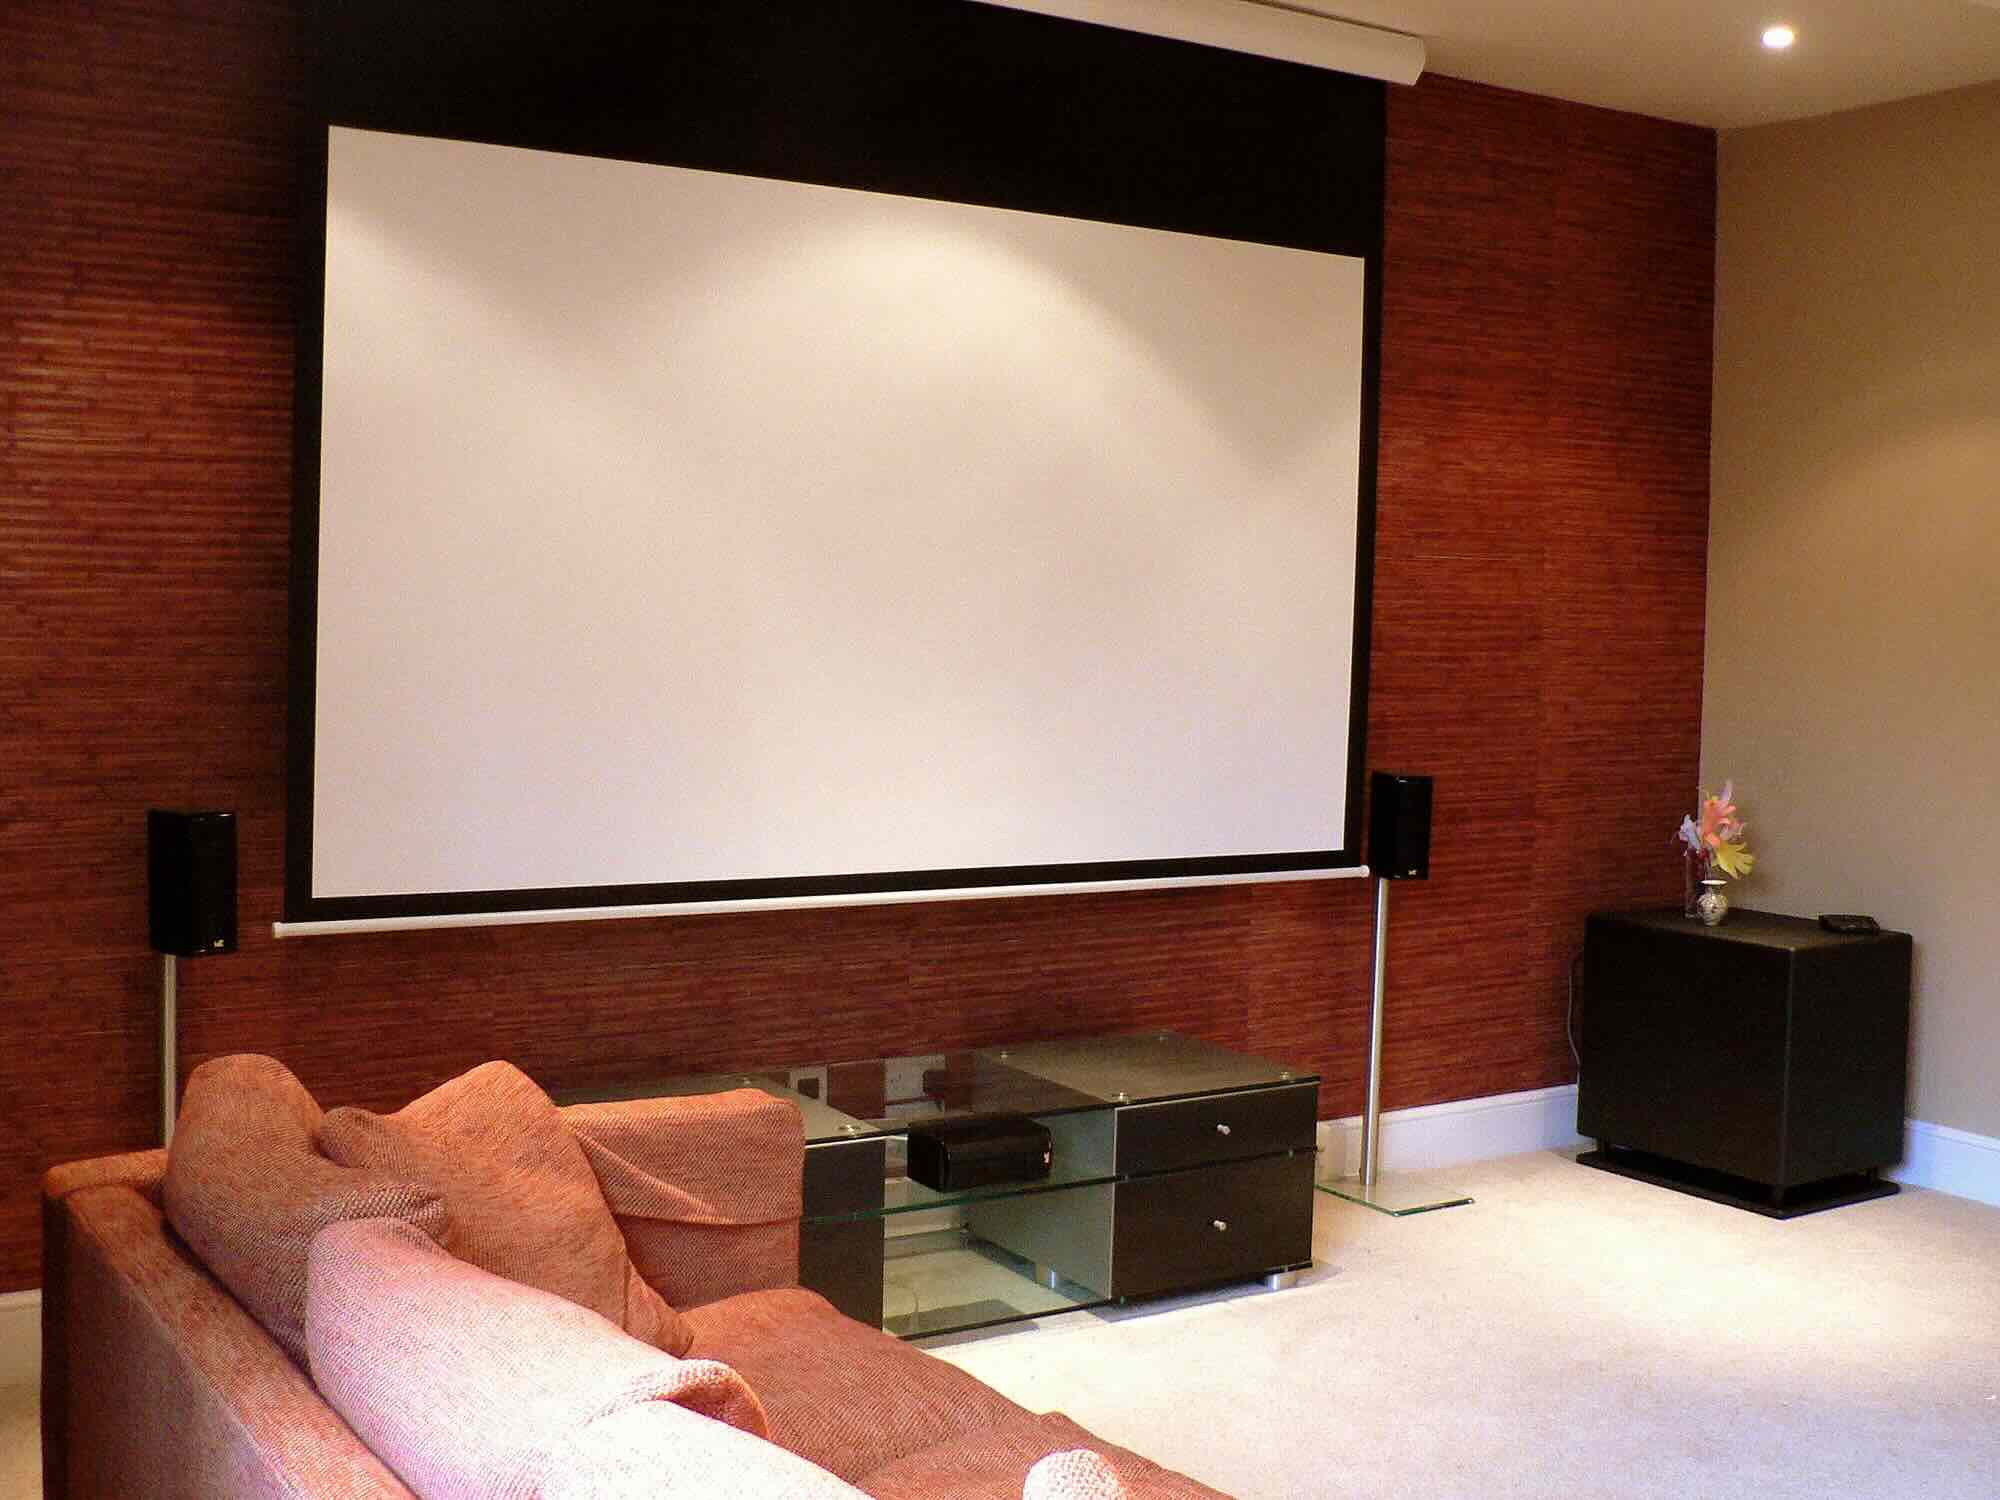 How To Roll Up A Projector Screen